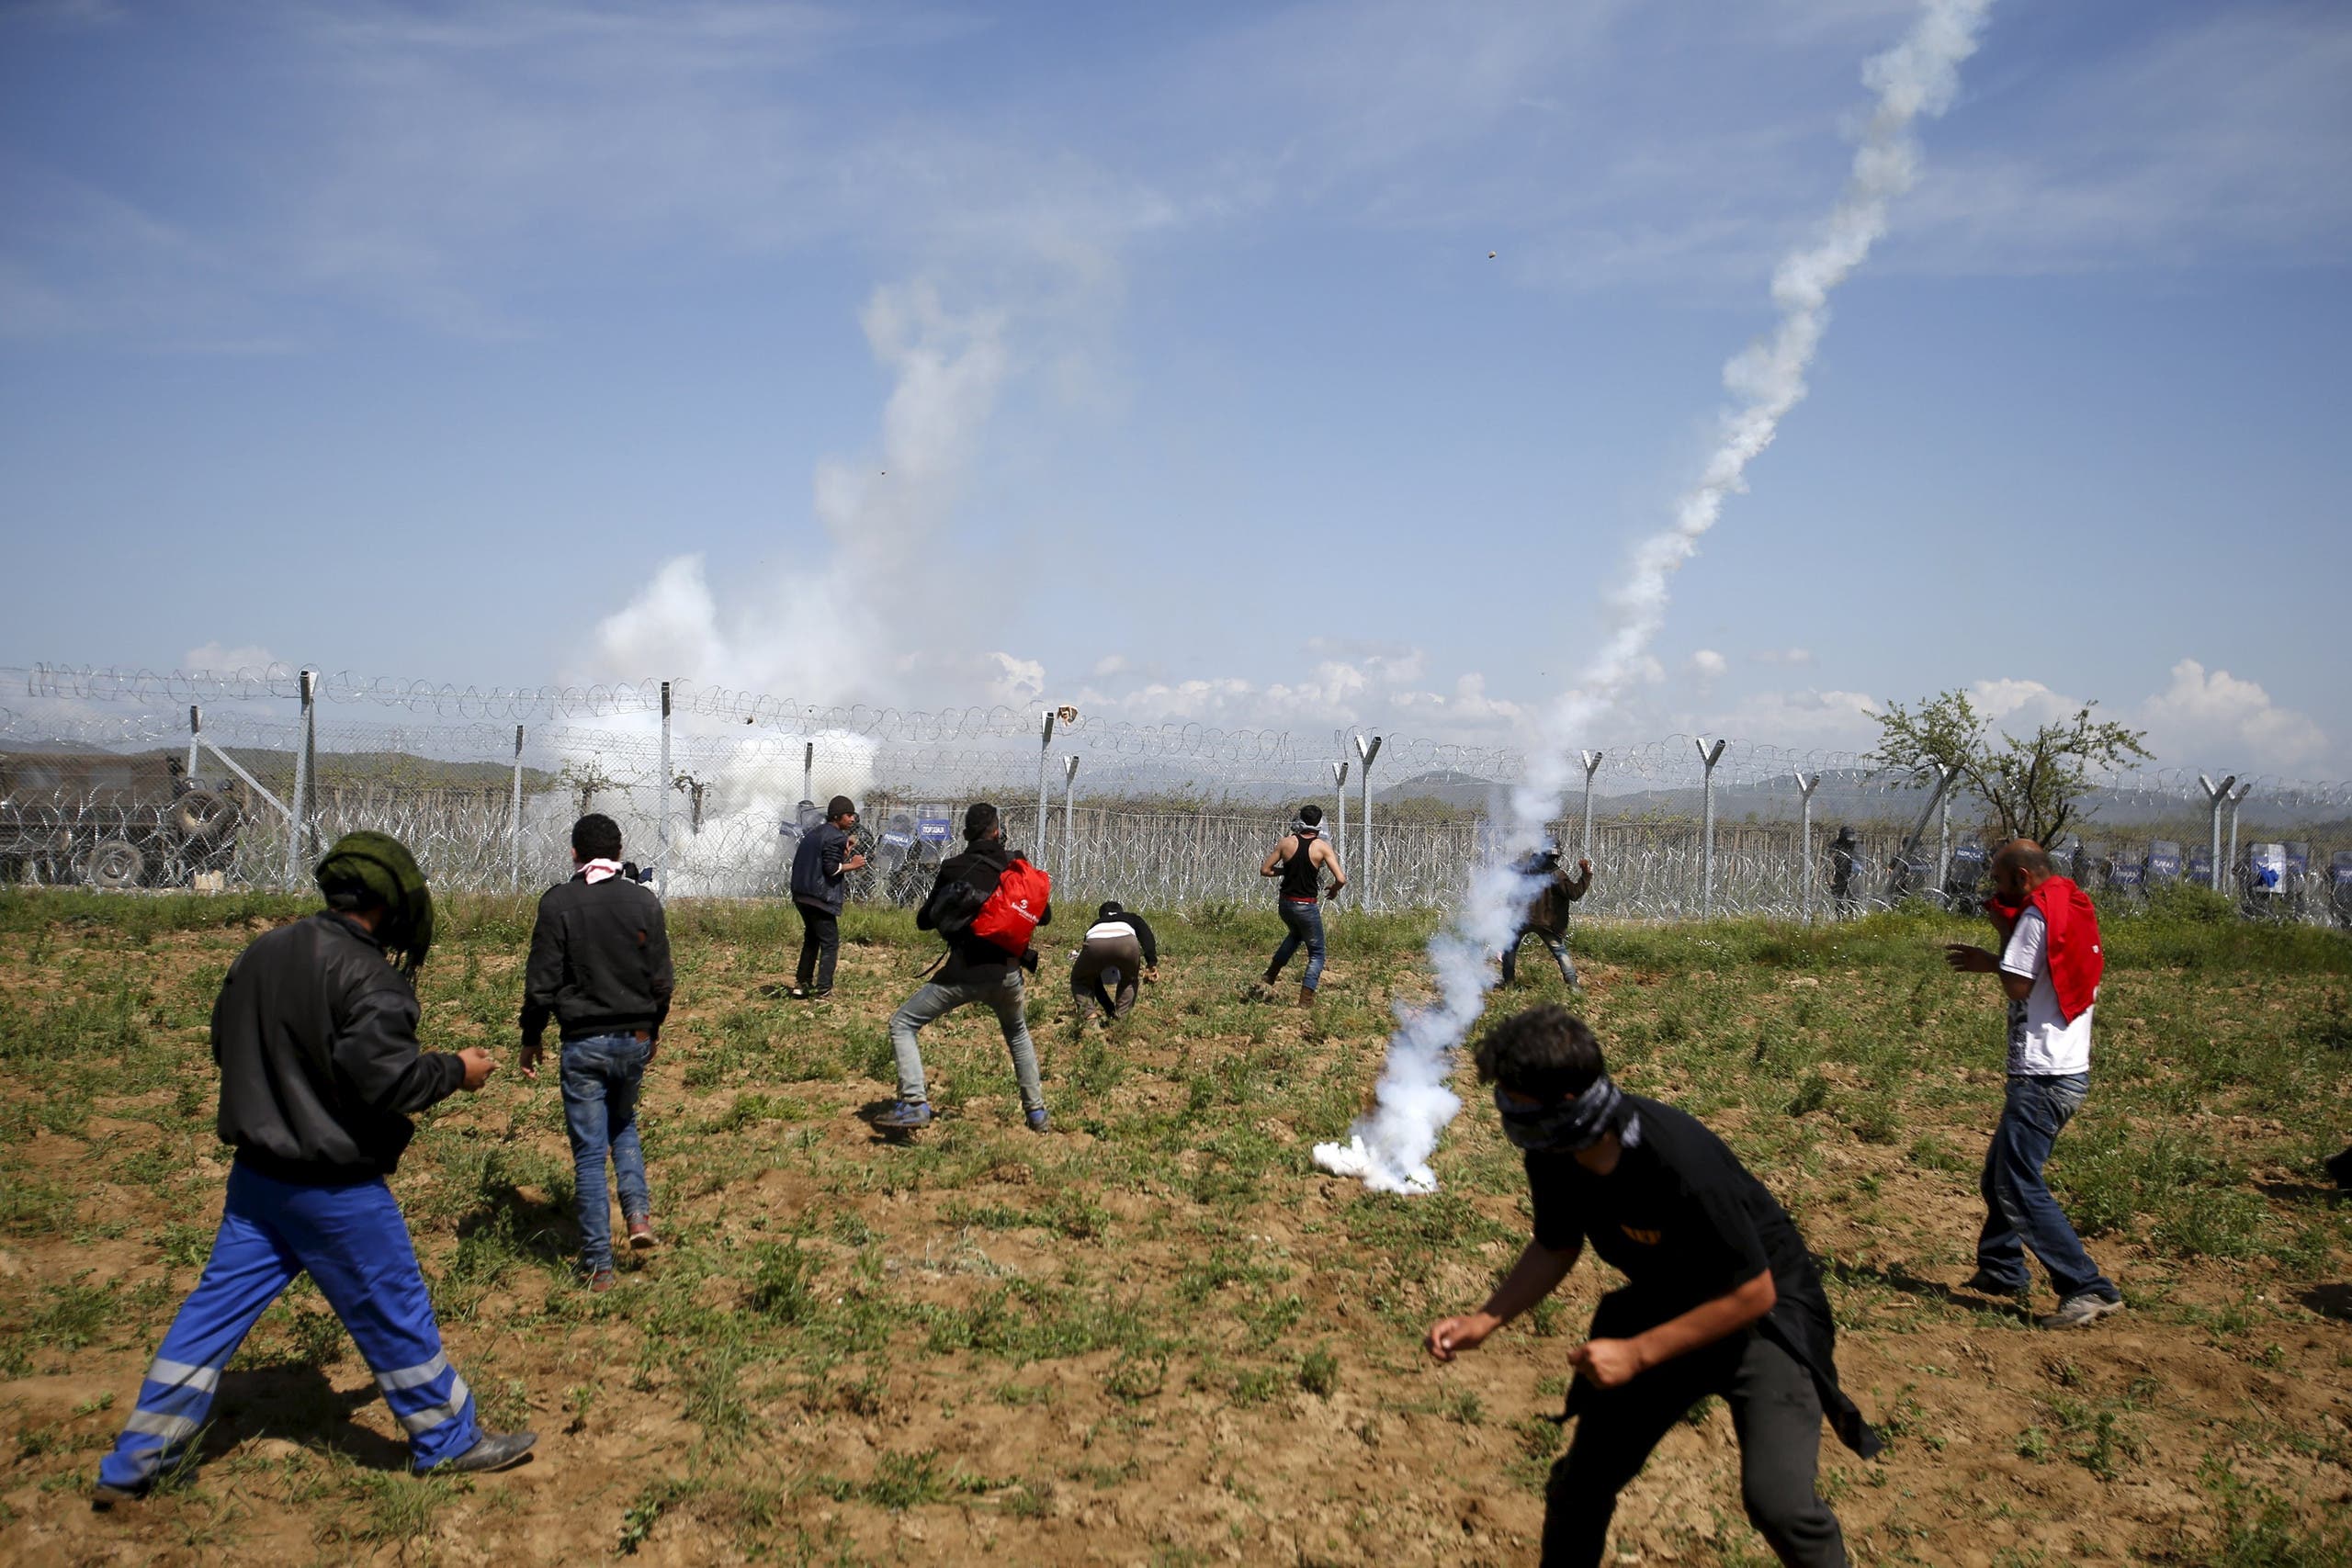 A teargas canister thrown by Macedonian police lands among protesting migrants during clashes next to a border fence at a makeshift camp for refugees and migrants at the Greek-Macedonian border near the village of Idomeni, Greece, April 10, 2016. (reuters)